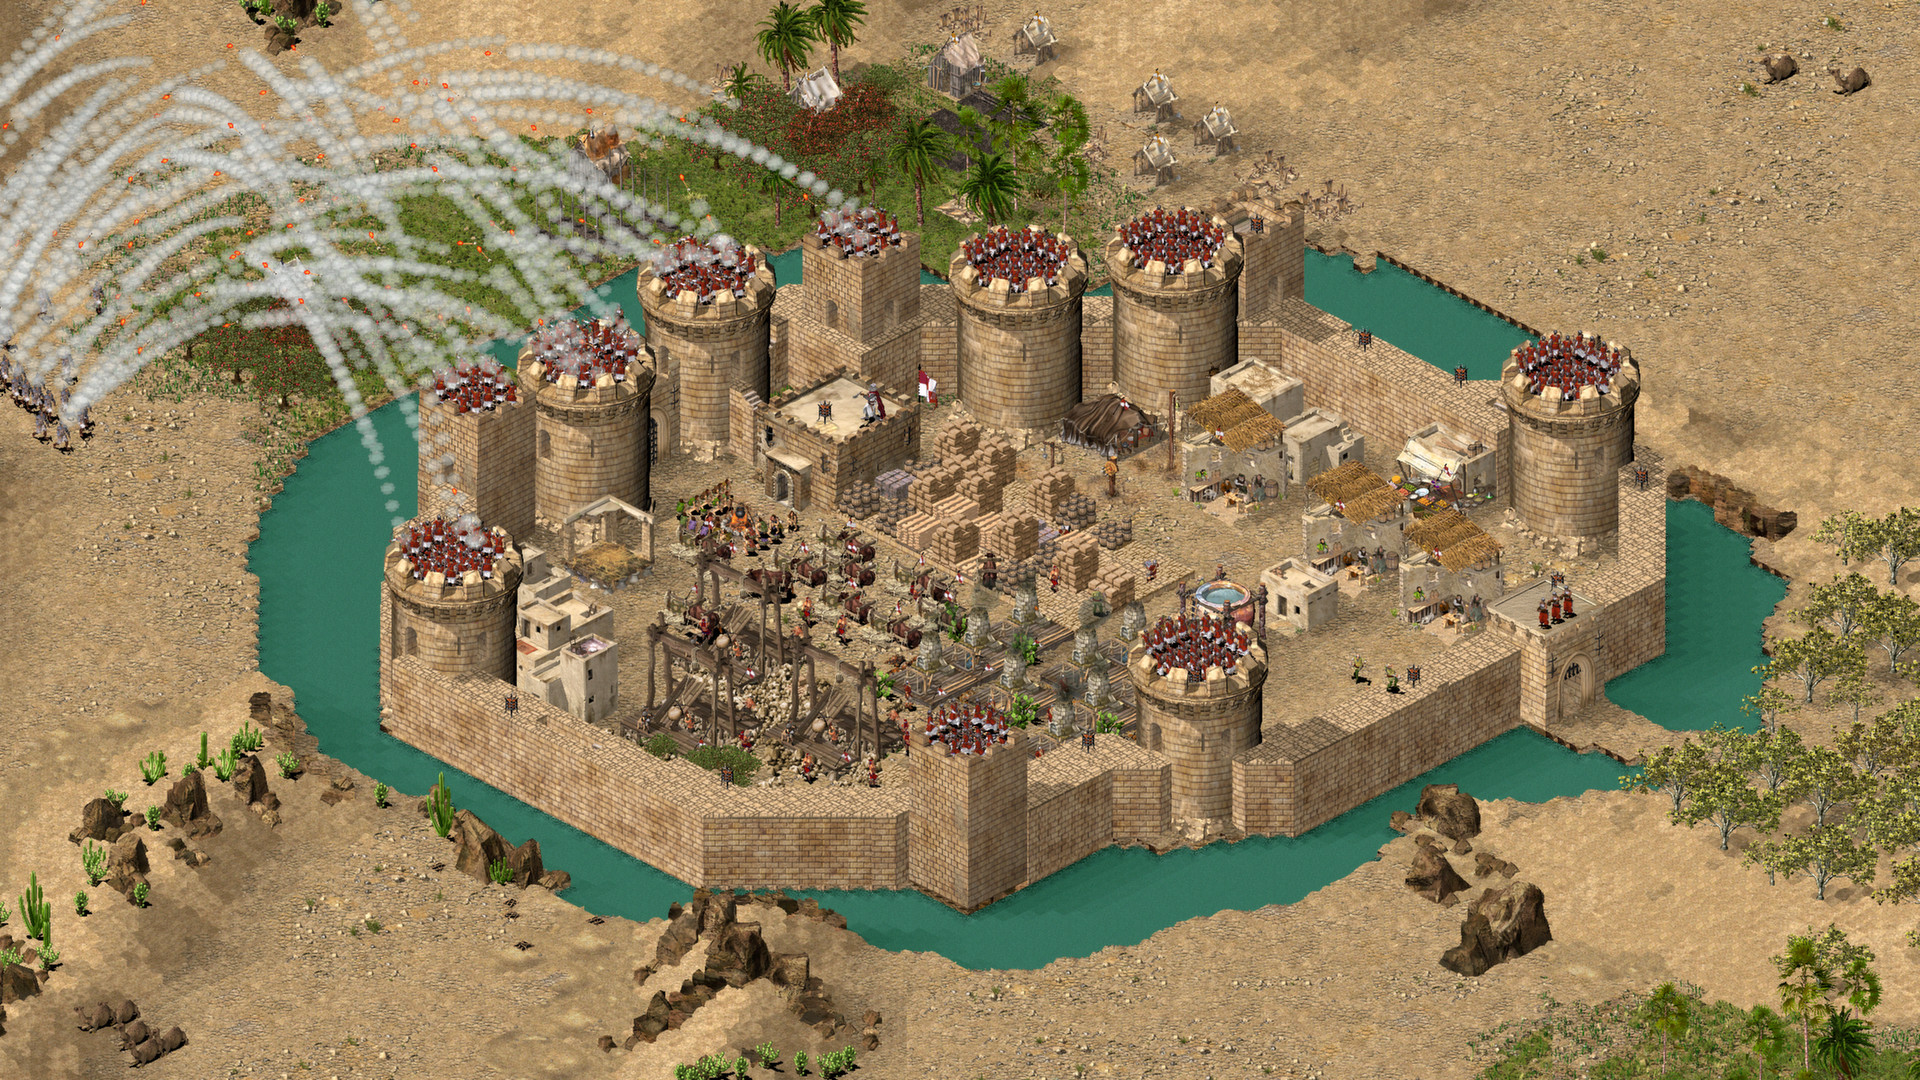 stronghold crusader 2 download full game free pc